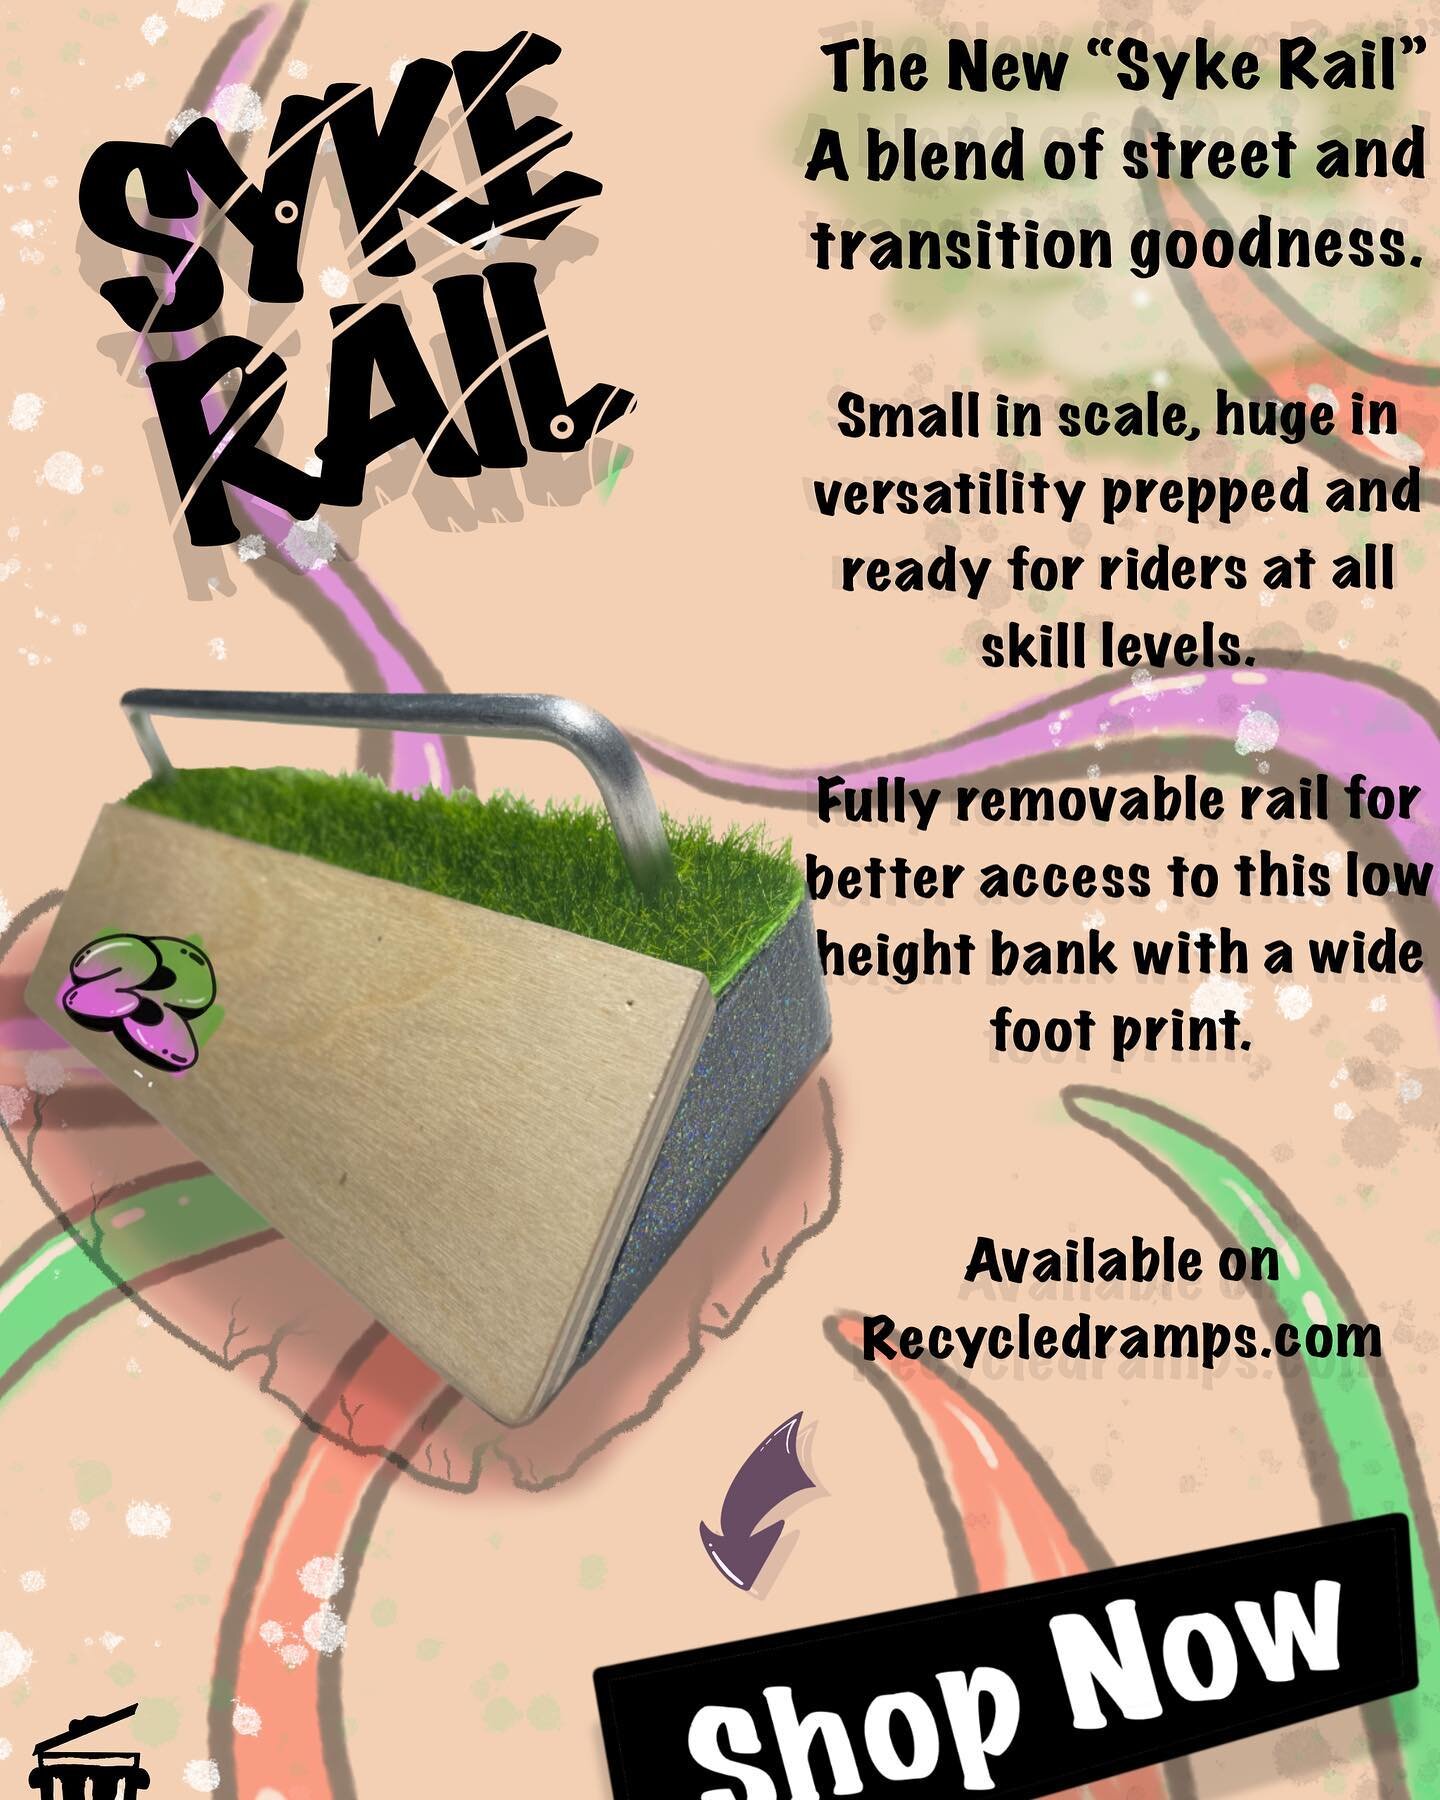 SYKE RAIL!!!!!
Have you tried this new one out yet?
Super cool little addition to any setup 

Available Now!!

♻️
♻️
♻️
♻️

#fingerboard #fingerboarding  #fingerboards #fingerboardingisfun #fingerboardingruinedmylife  #fingerboardtv #fingerboardstore